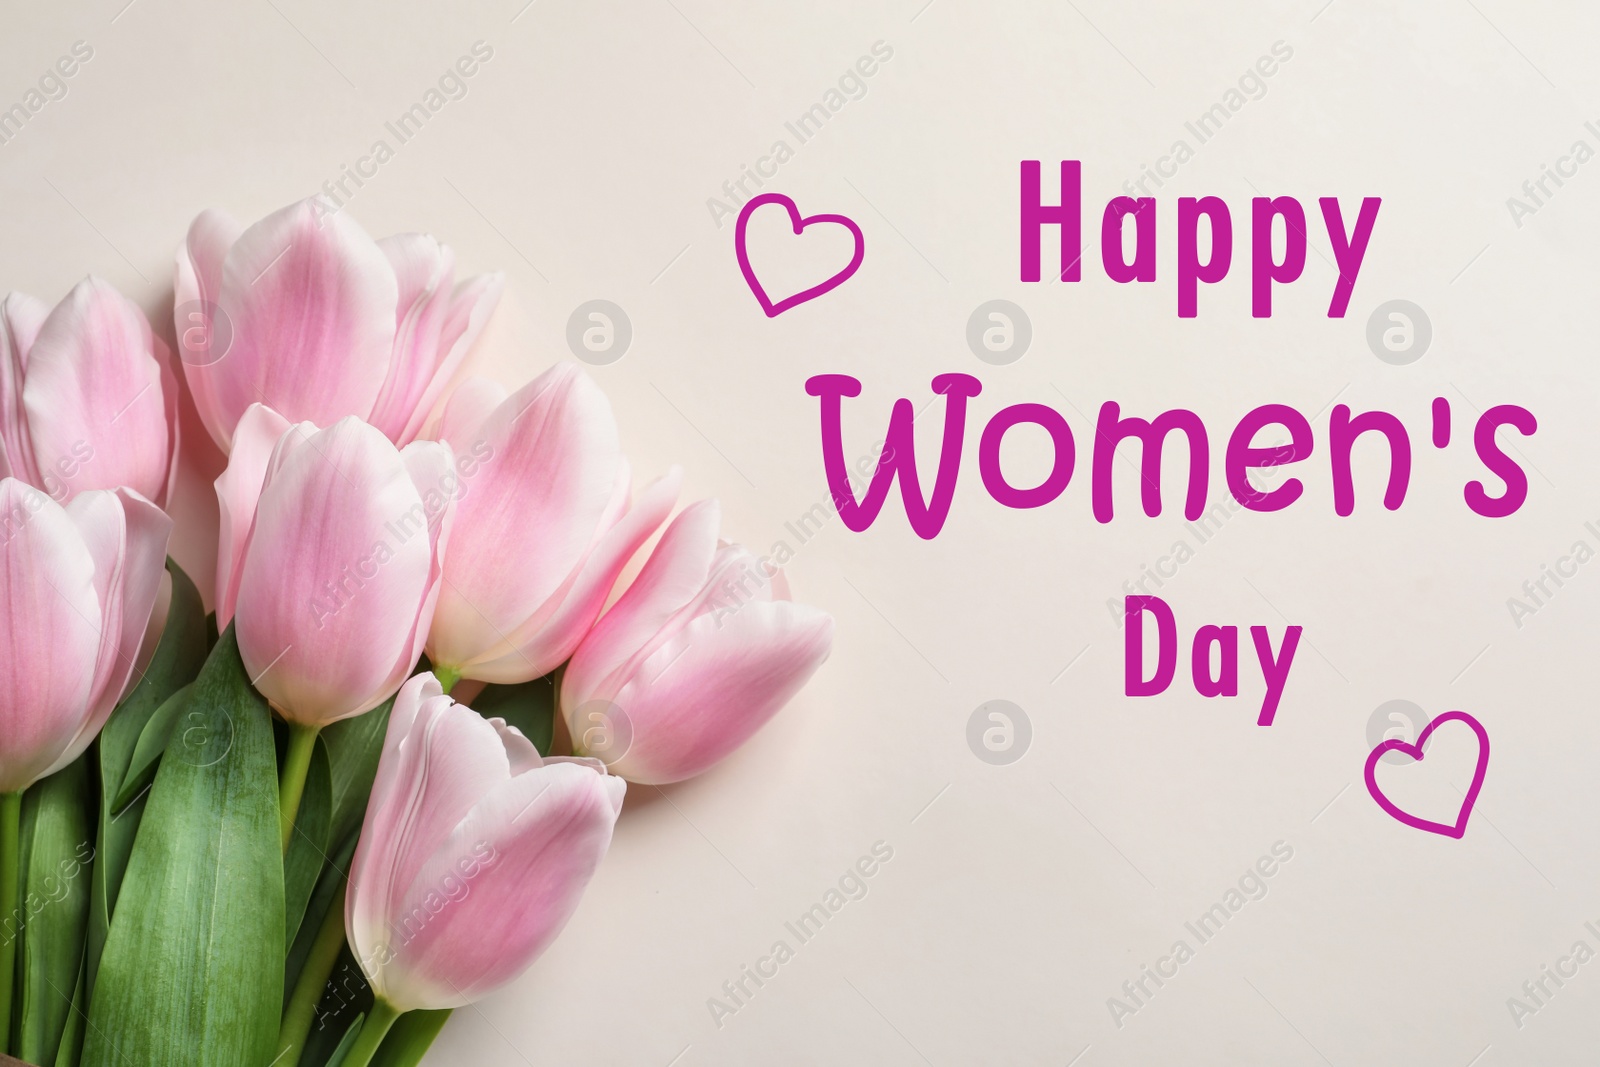 Image of Beautiful tulips on light background, top view. Happy Women's Day